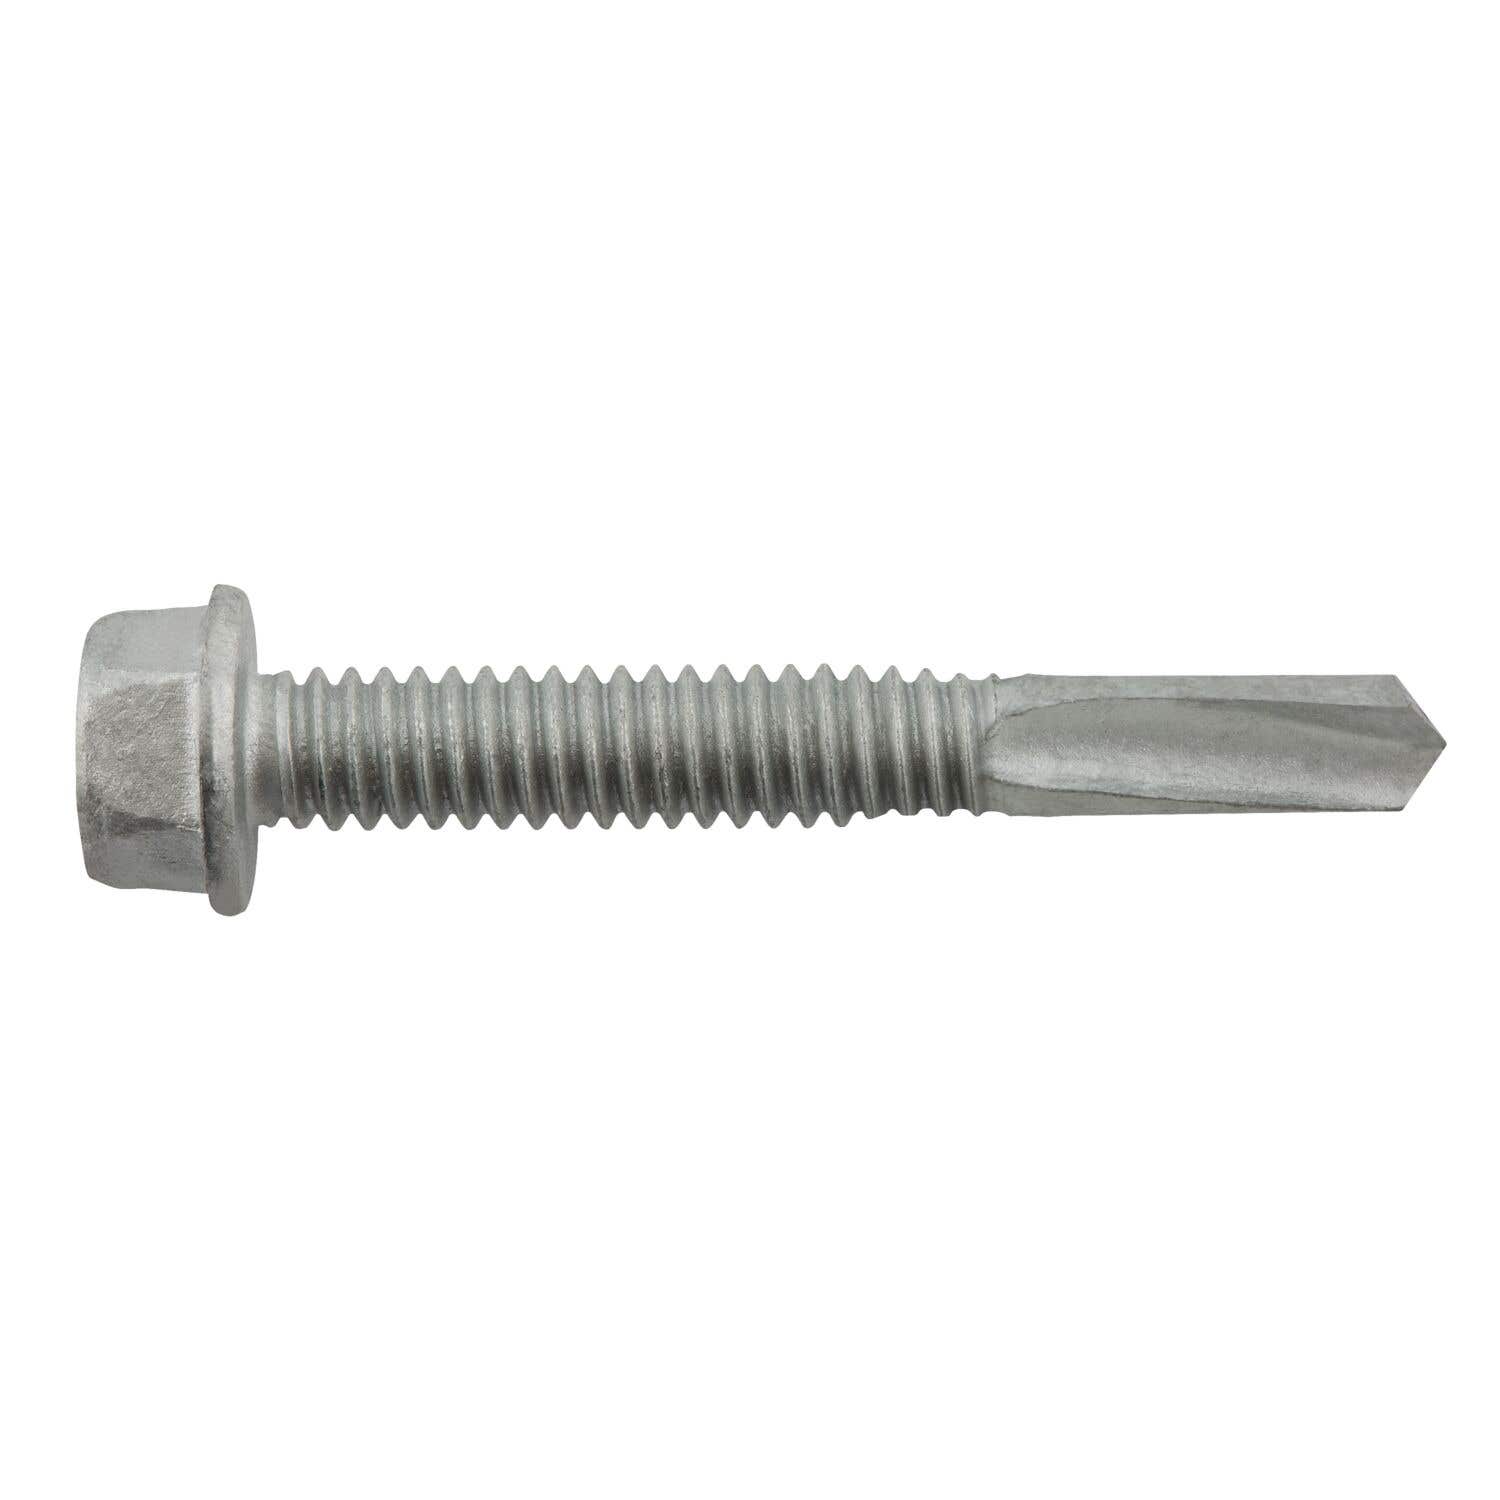 1/4"-20 x 1-3/4" Dril-Flex® Structural Self-Drilling Screws, 3/8 Hex Washer Head, #5 Point, Alloy Steel with Stalgard SUB Coating